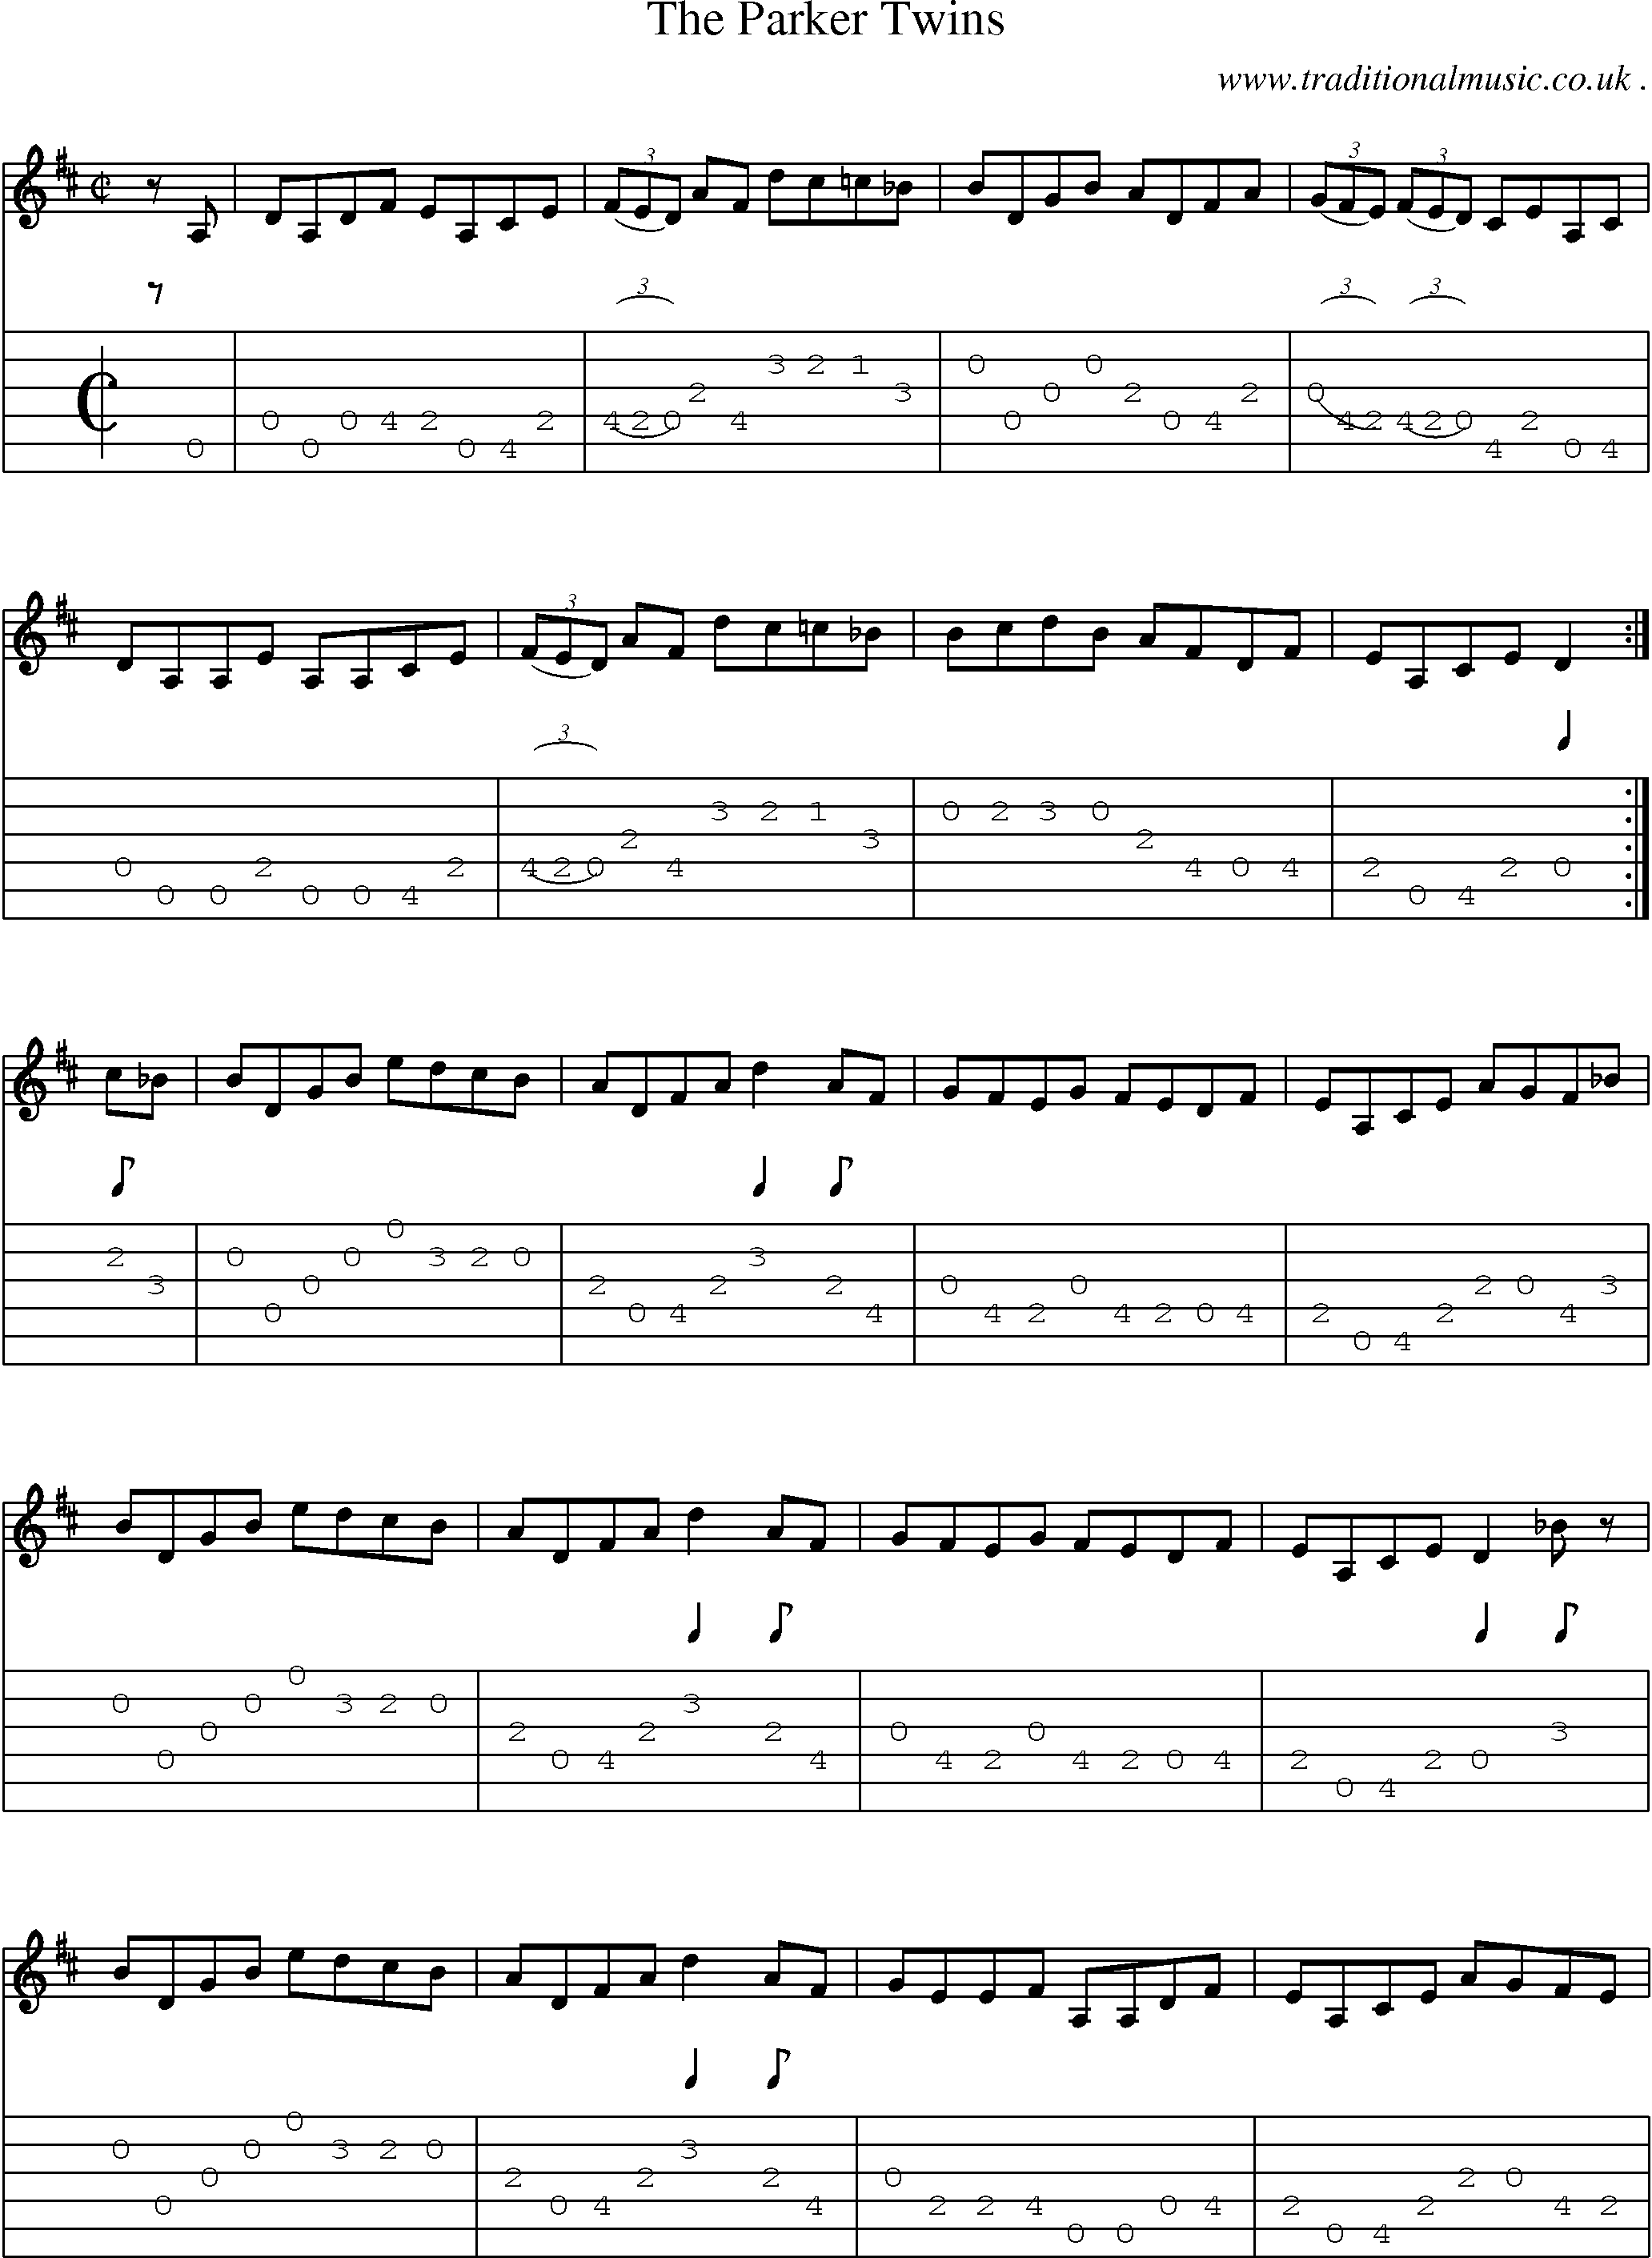 Sheet-Music and Guitar Tabs for The Parker Twins